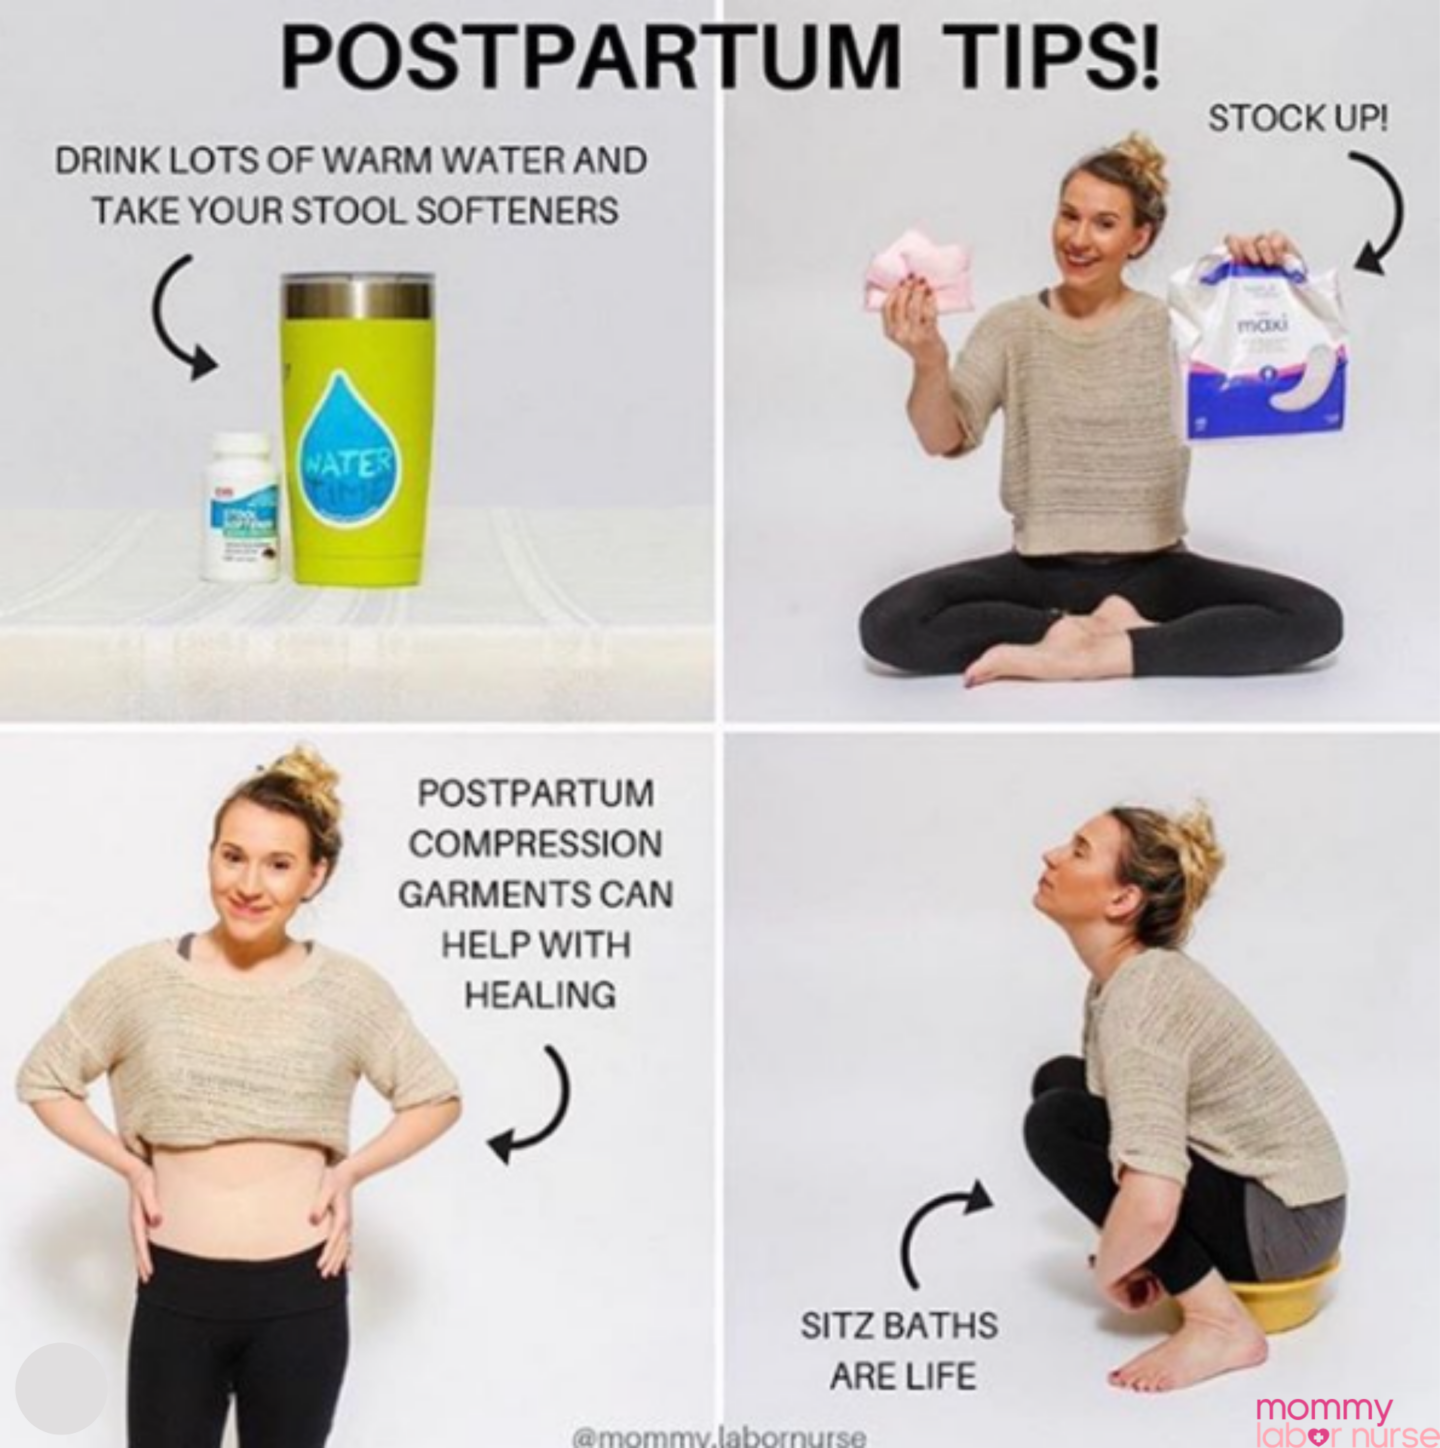 Ten tips for your best postpartum recovery - Fika Midwifery